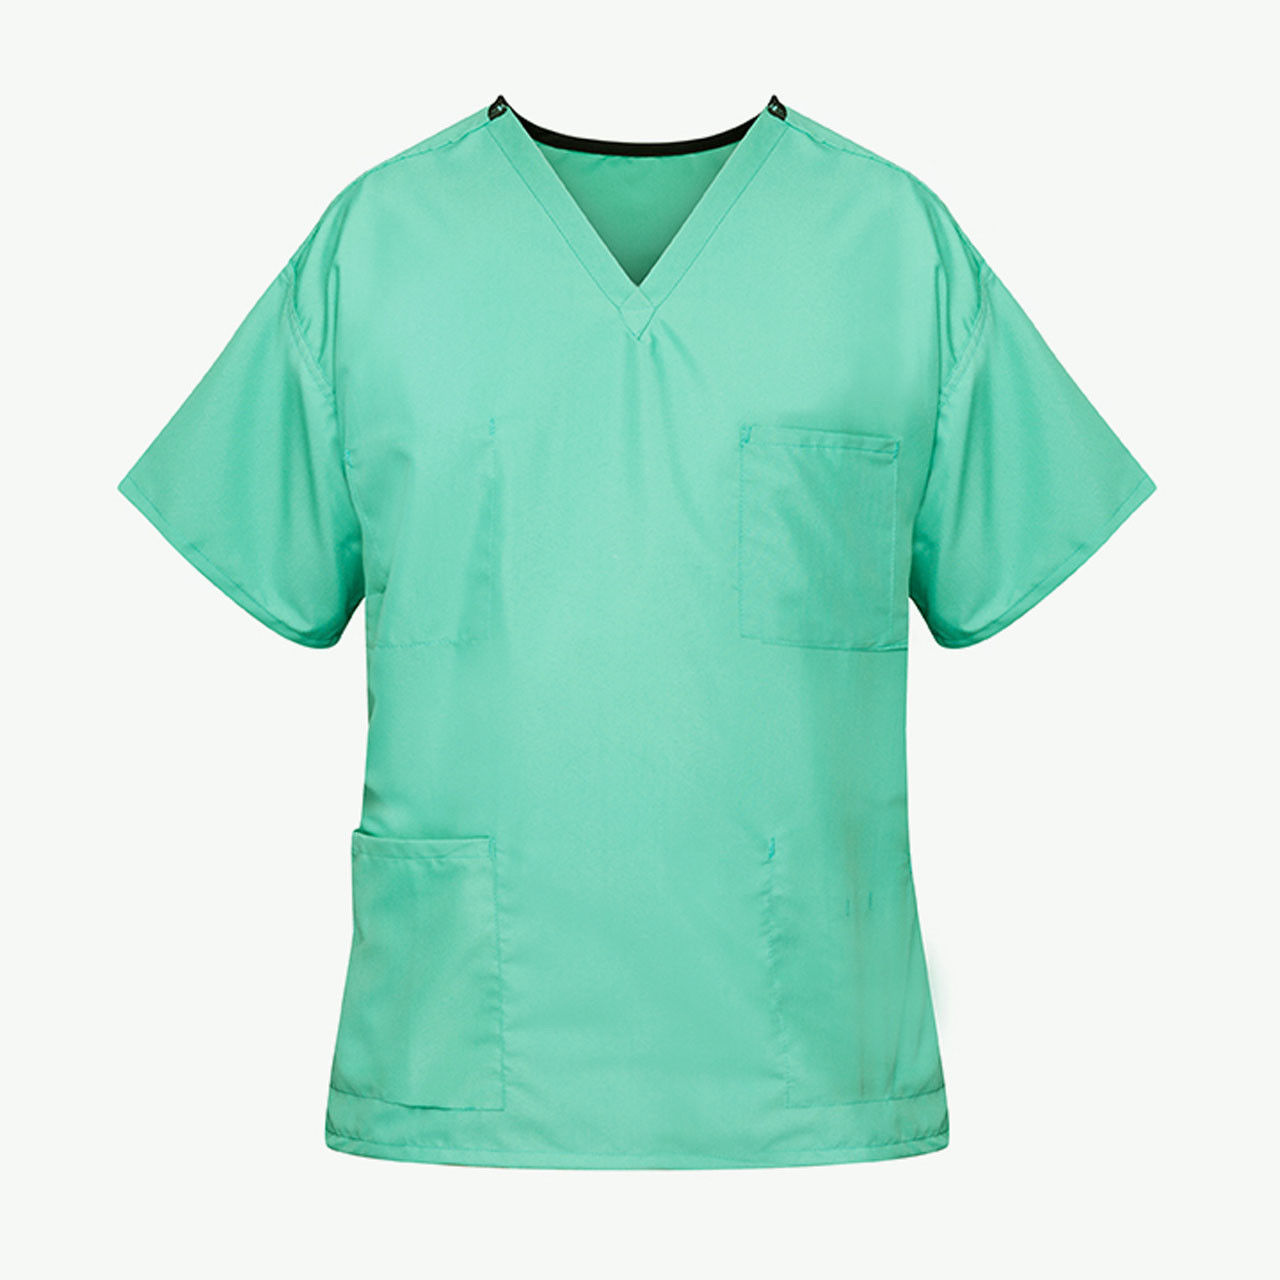 What color are these scrub tops? (jade green scrubs)